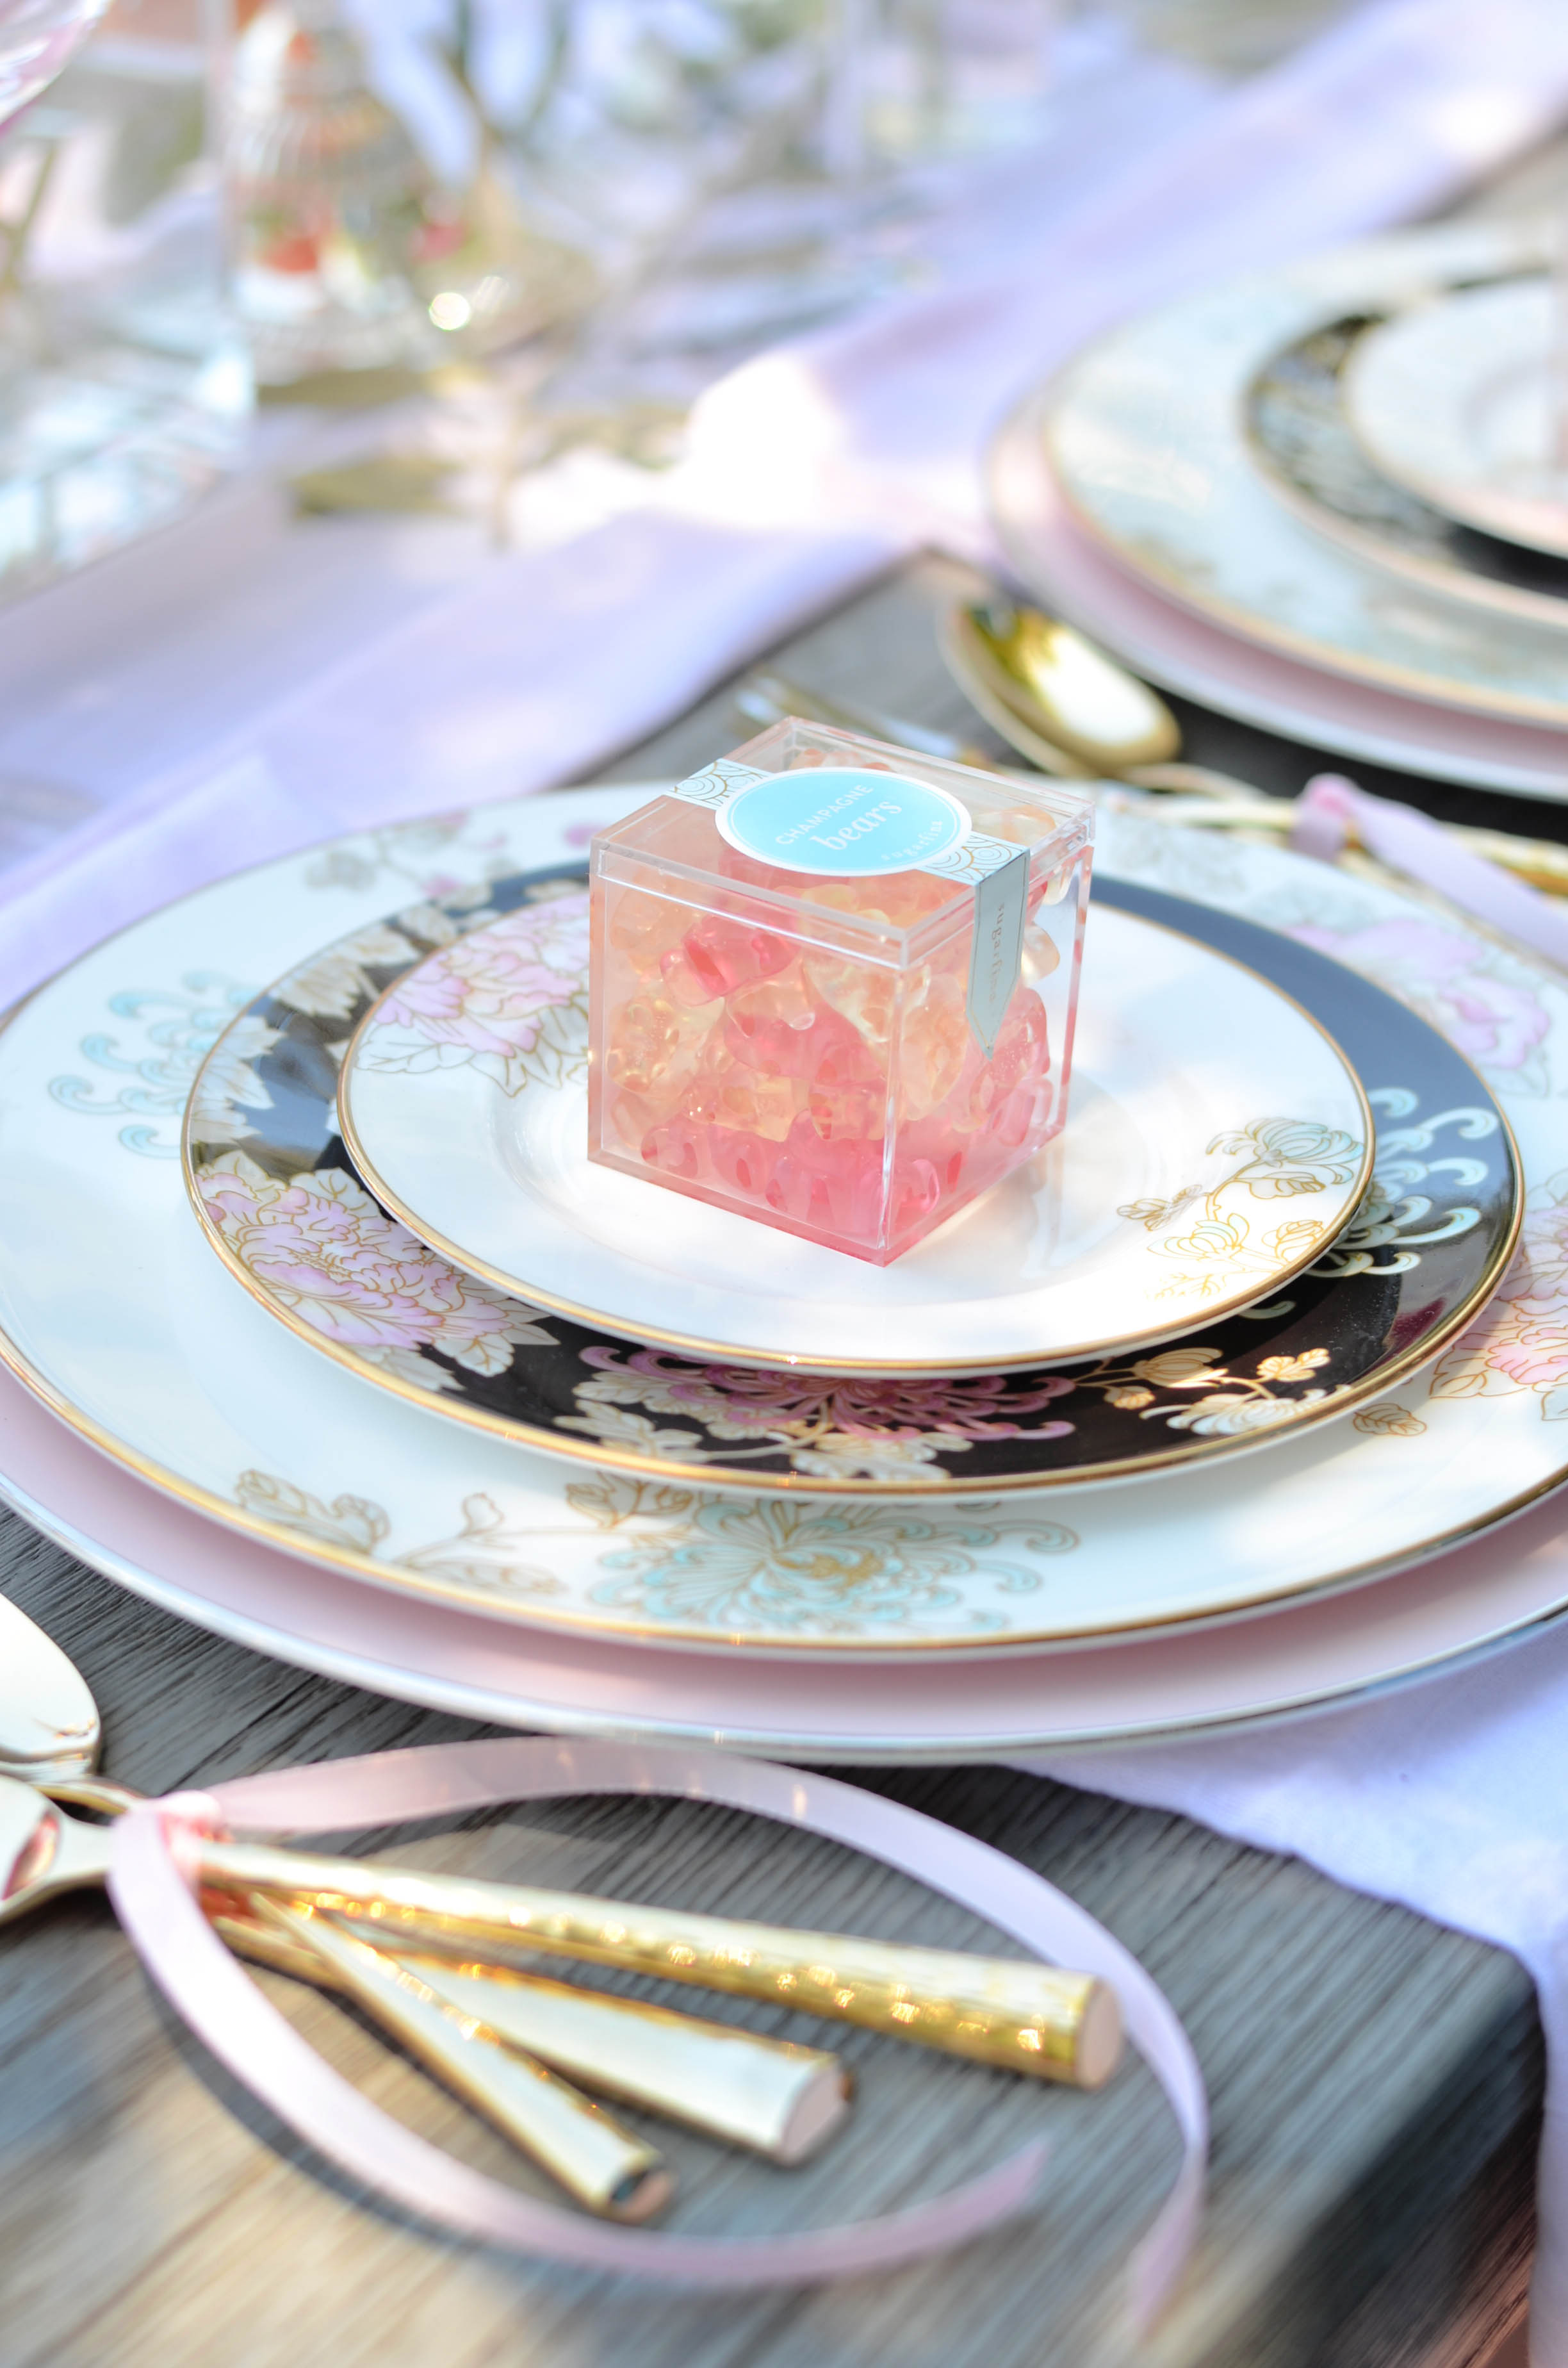  Marchesa's 'Painted Camellia' Dinnerware, Gold Imperial Caviar Table setting with Table + Dine by Stefanie of The Style Safari